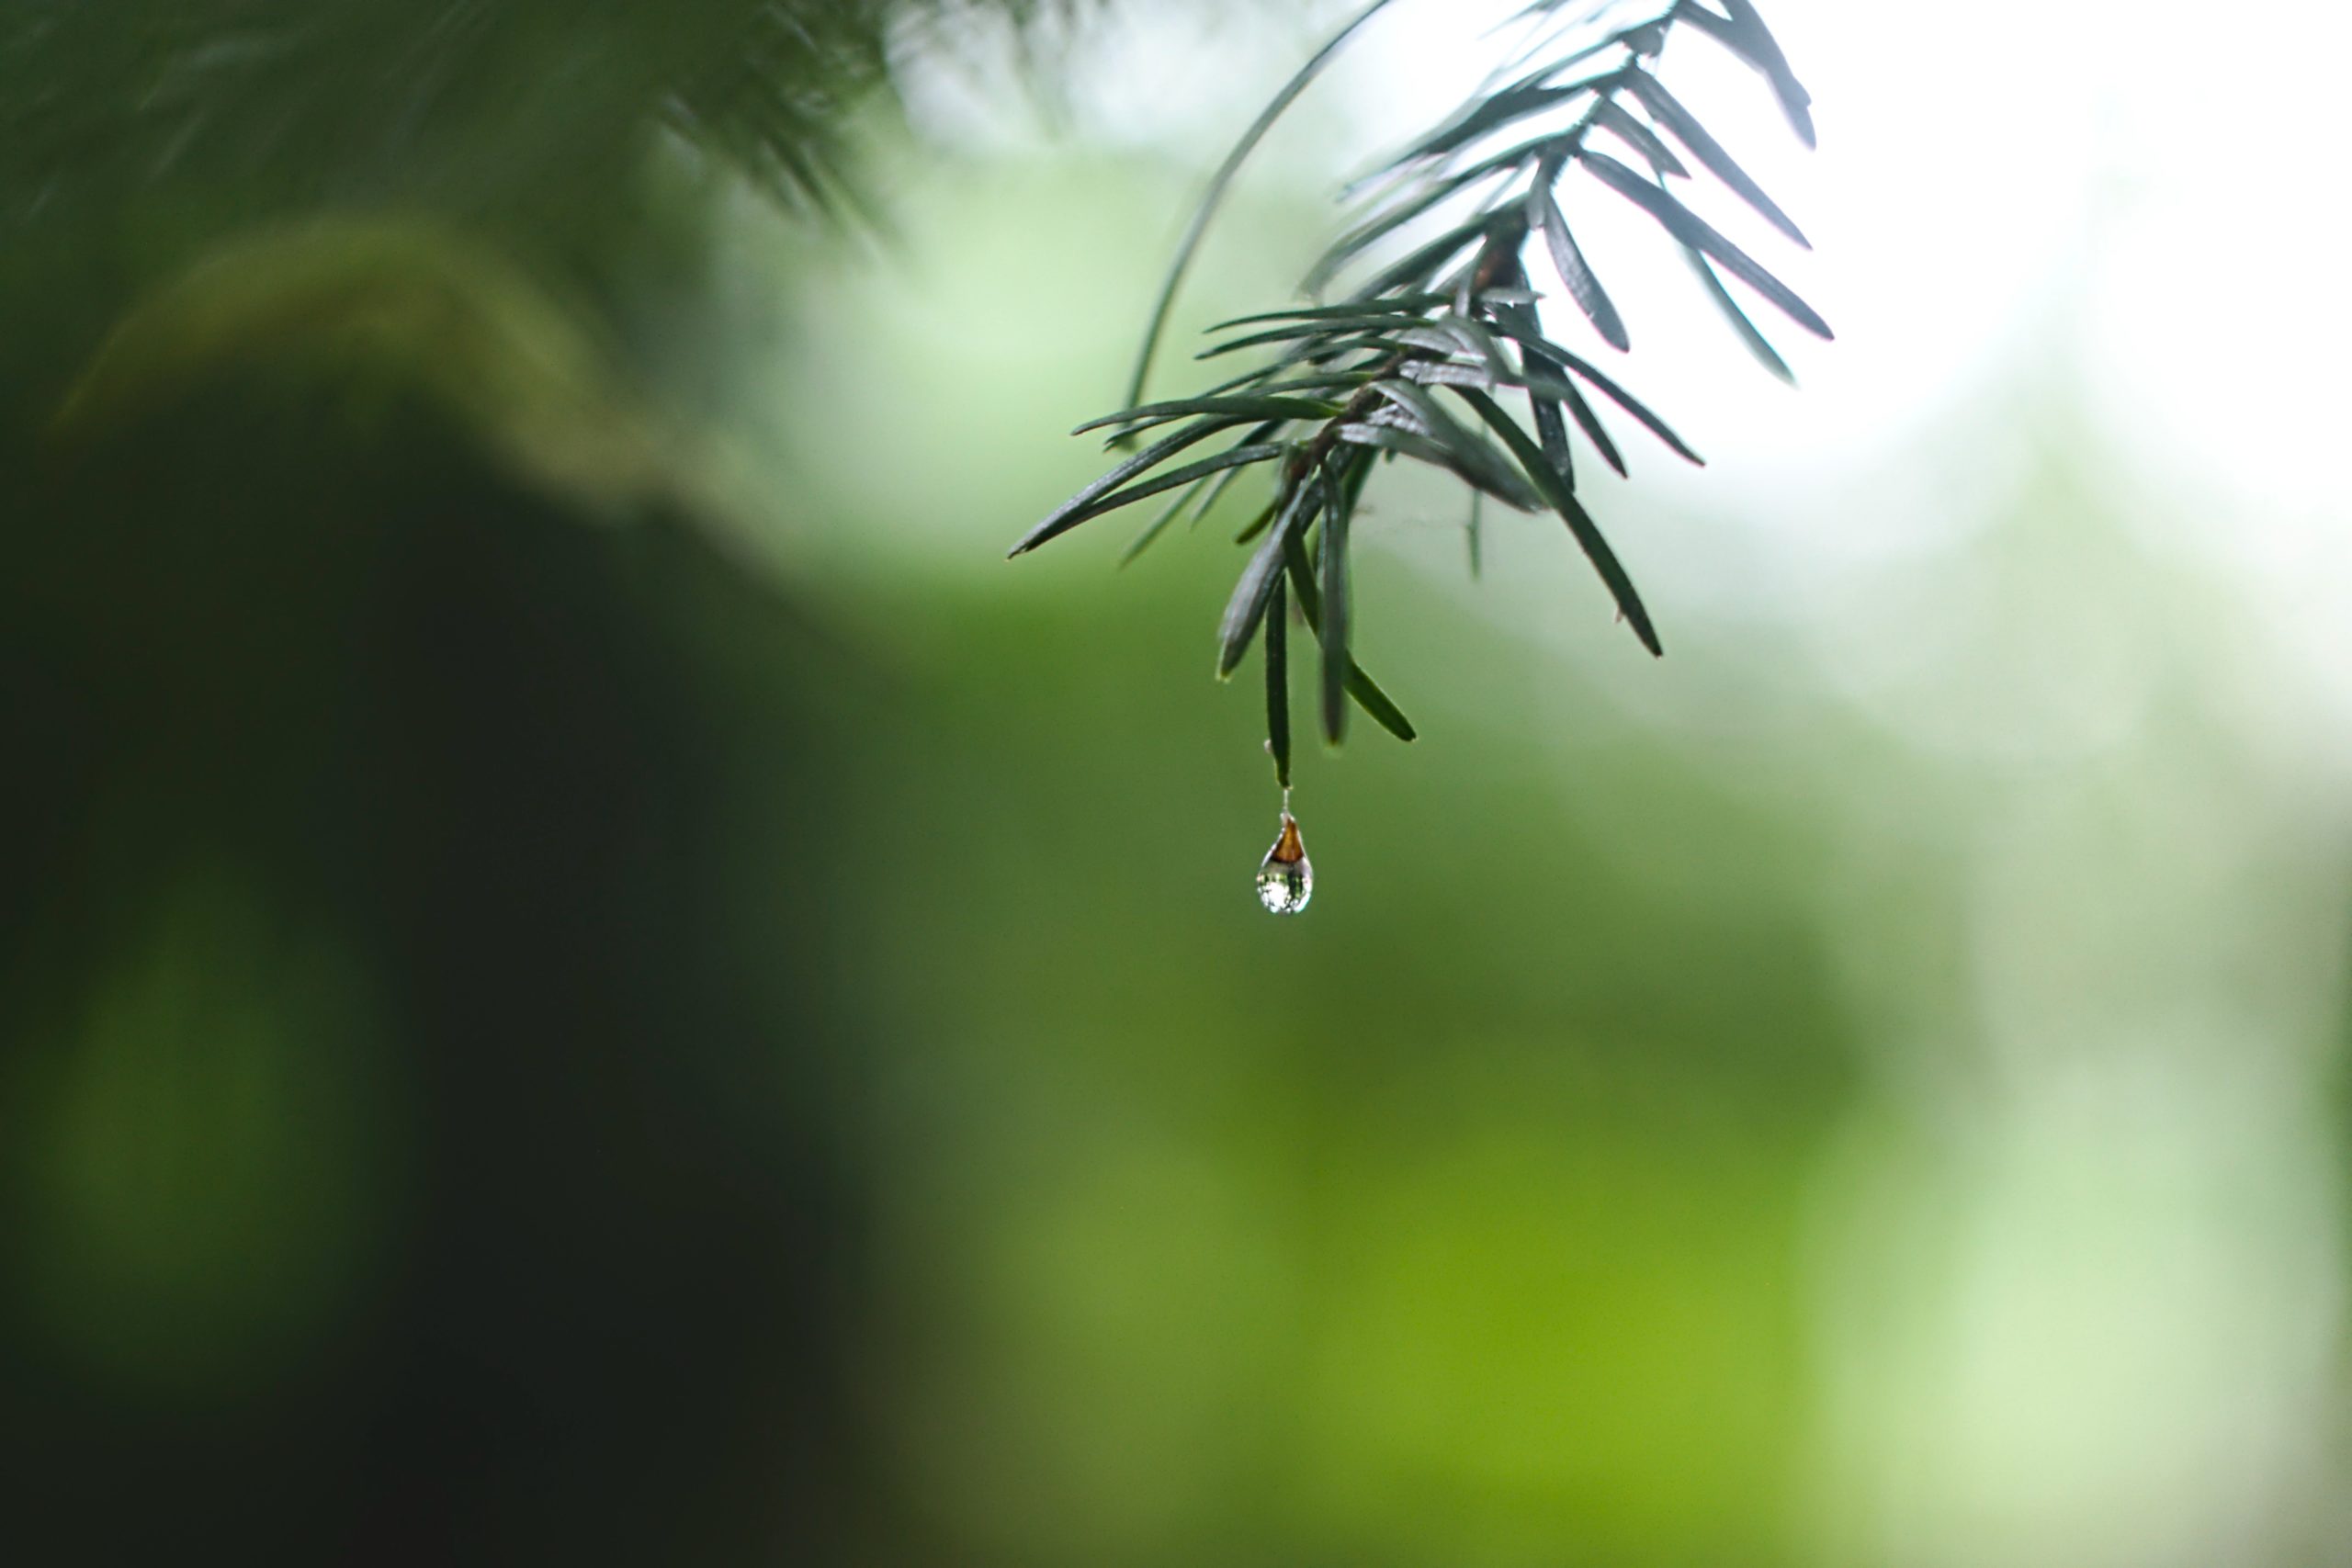 Closeup of an evergreen branch with a drop of water at the tip of the lowest needle.